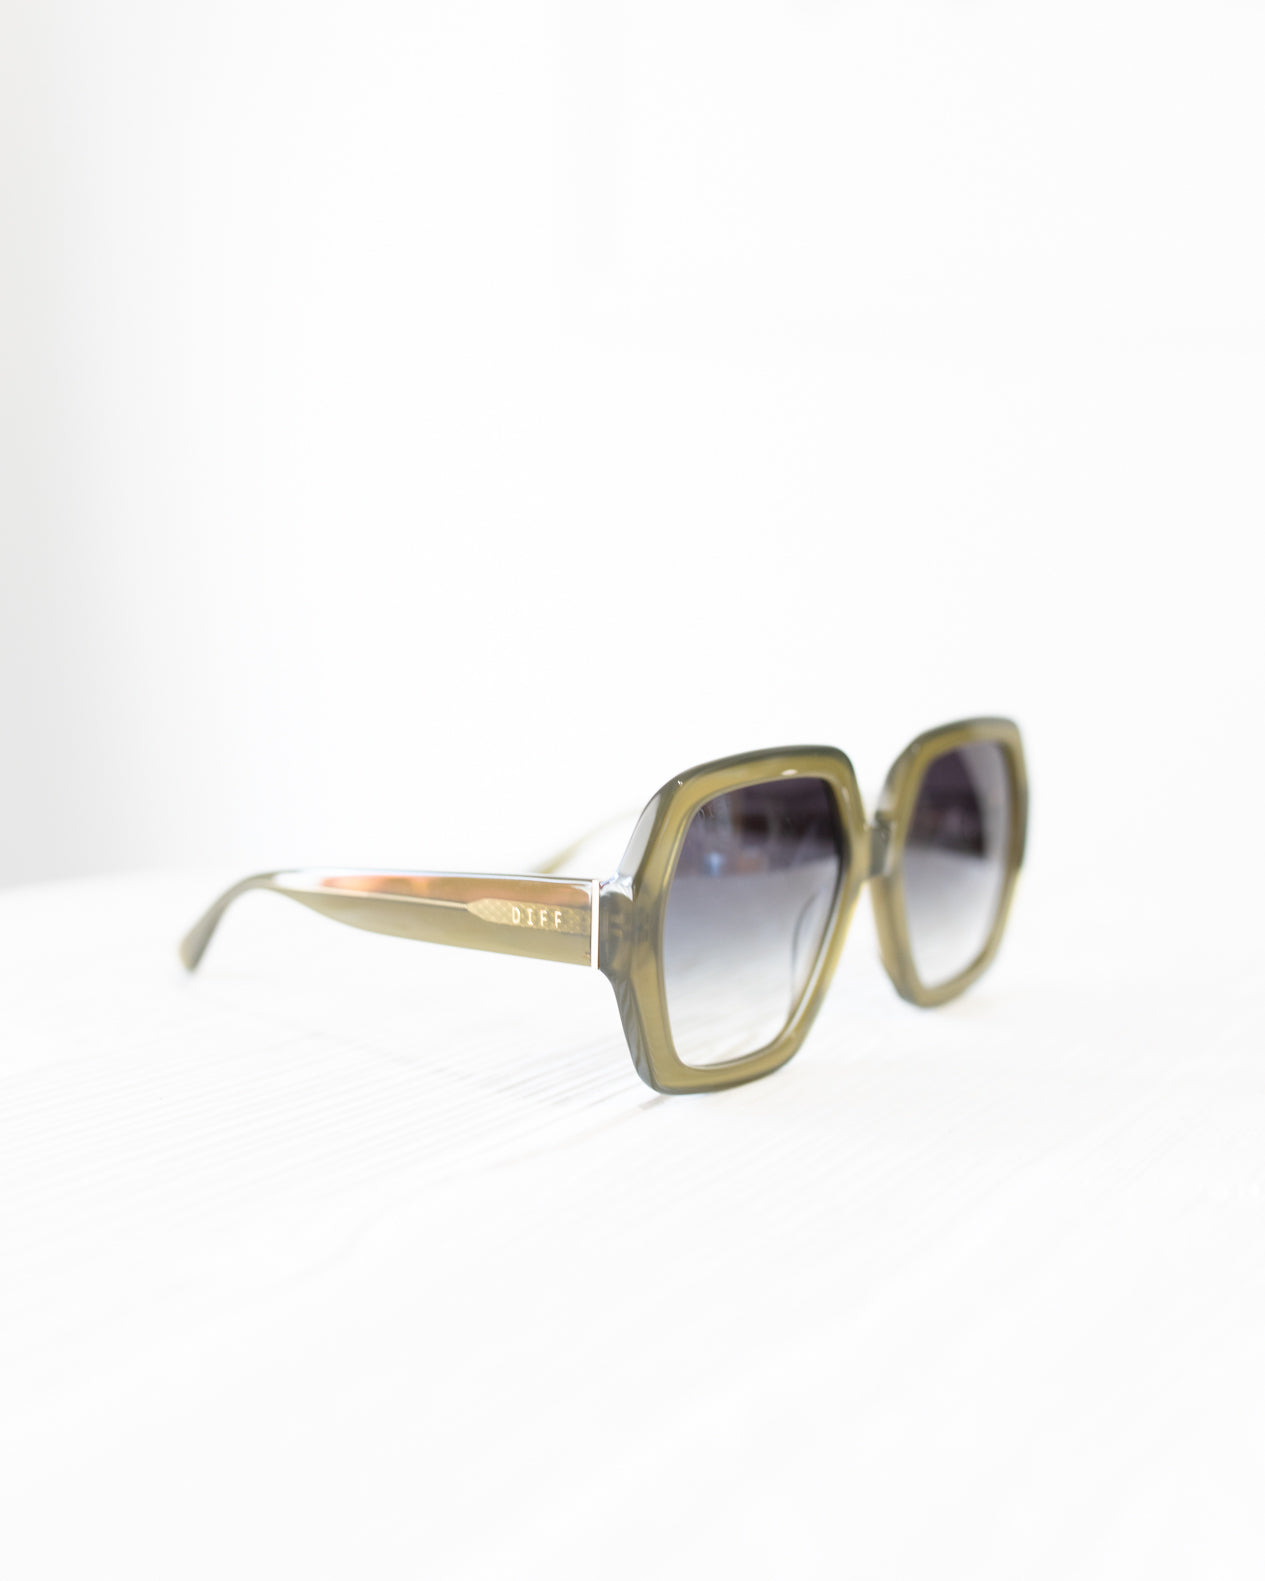 Nola Olive Green Oversized Sunglasses by DIFF